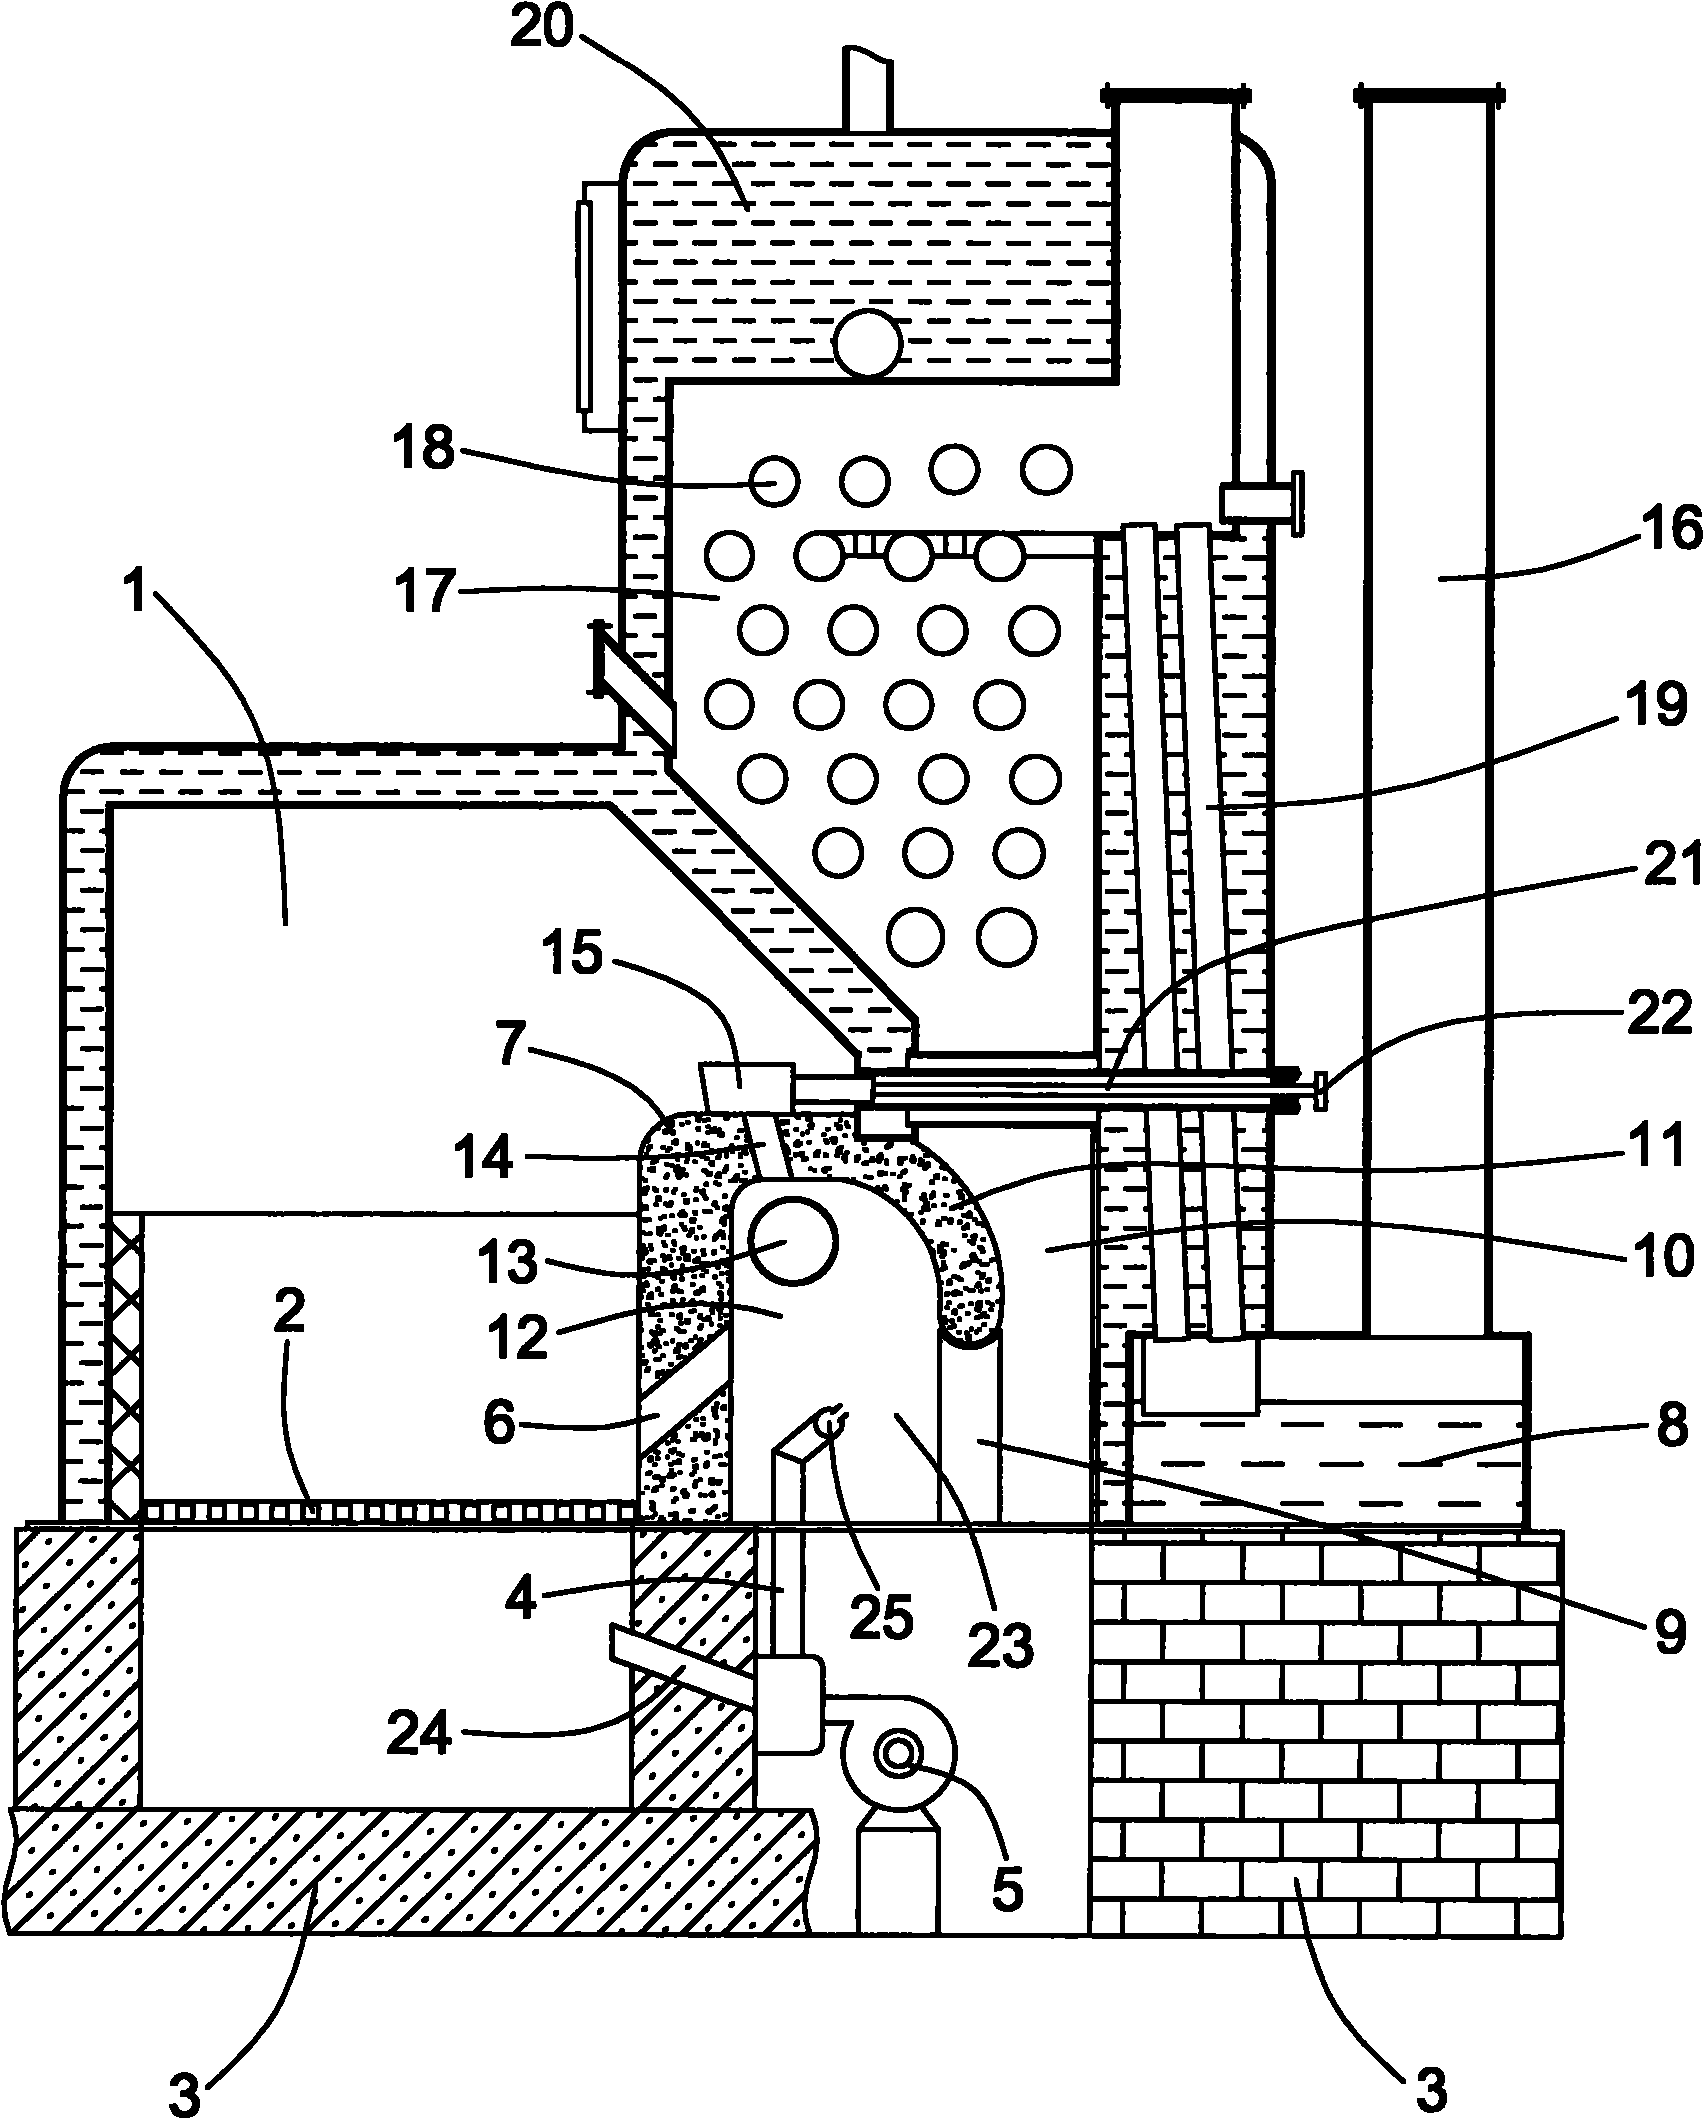 Coal-fired gasification swirl combustion furnace